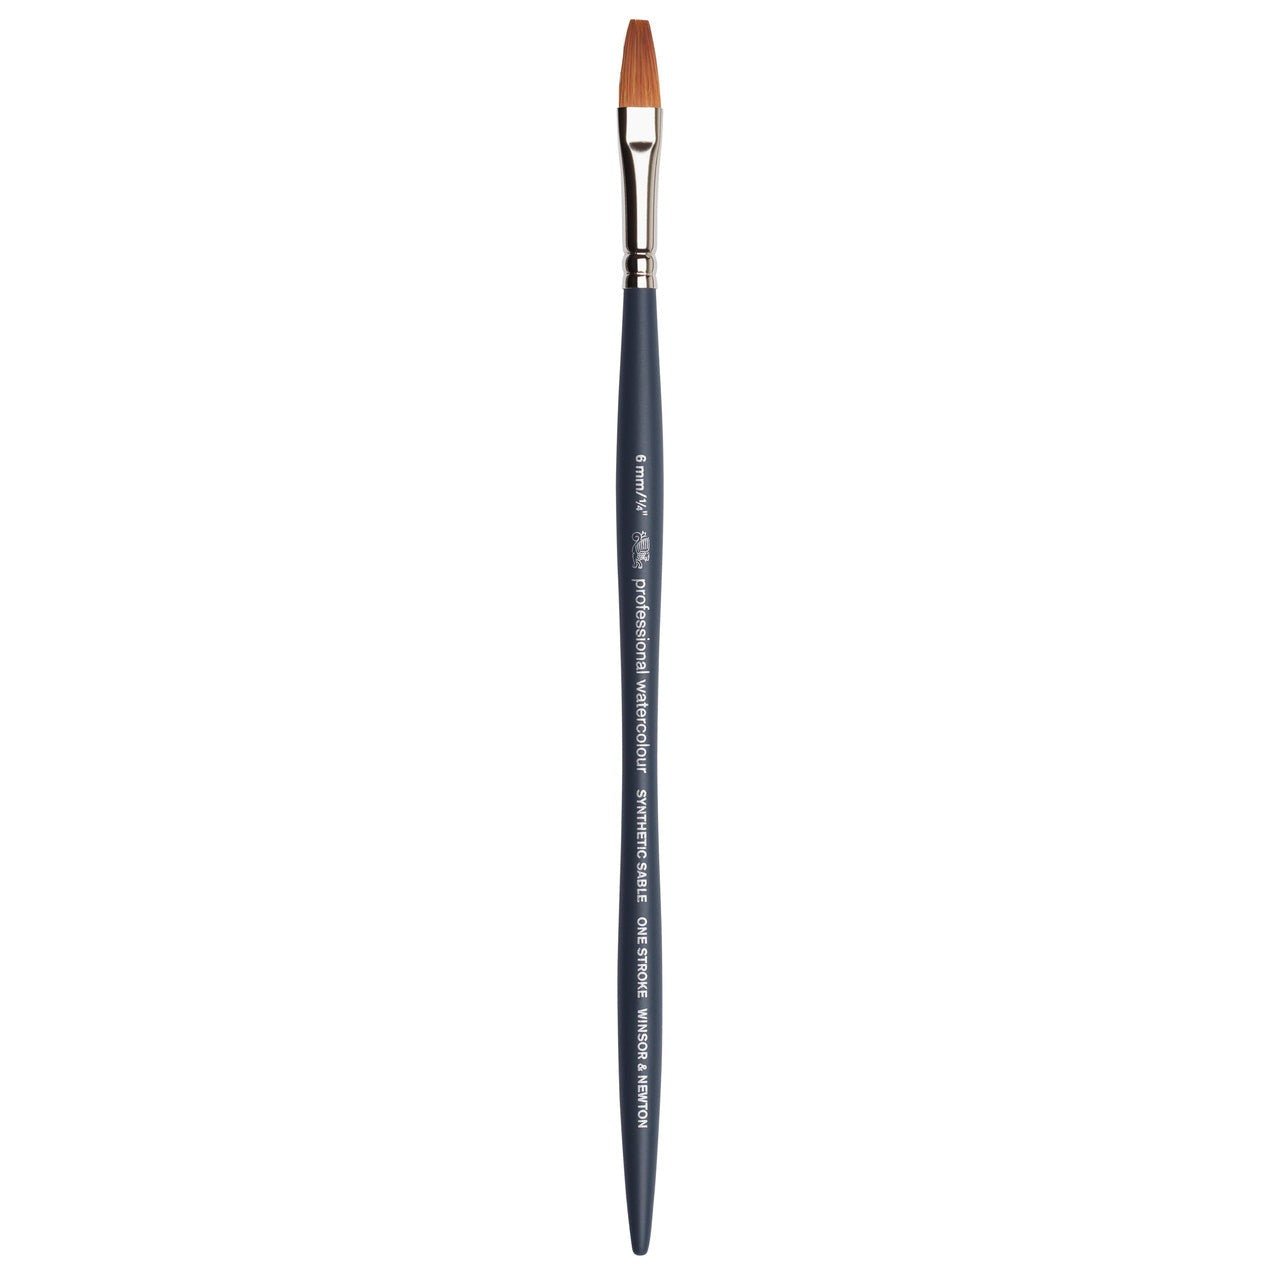 Winsor & Newton Professional Watercolor Synthetic Sable Brush - One Stroke 1/4 inch - merriartist.com